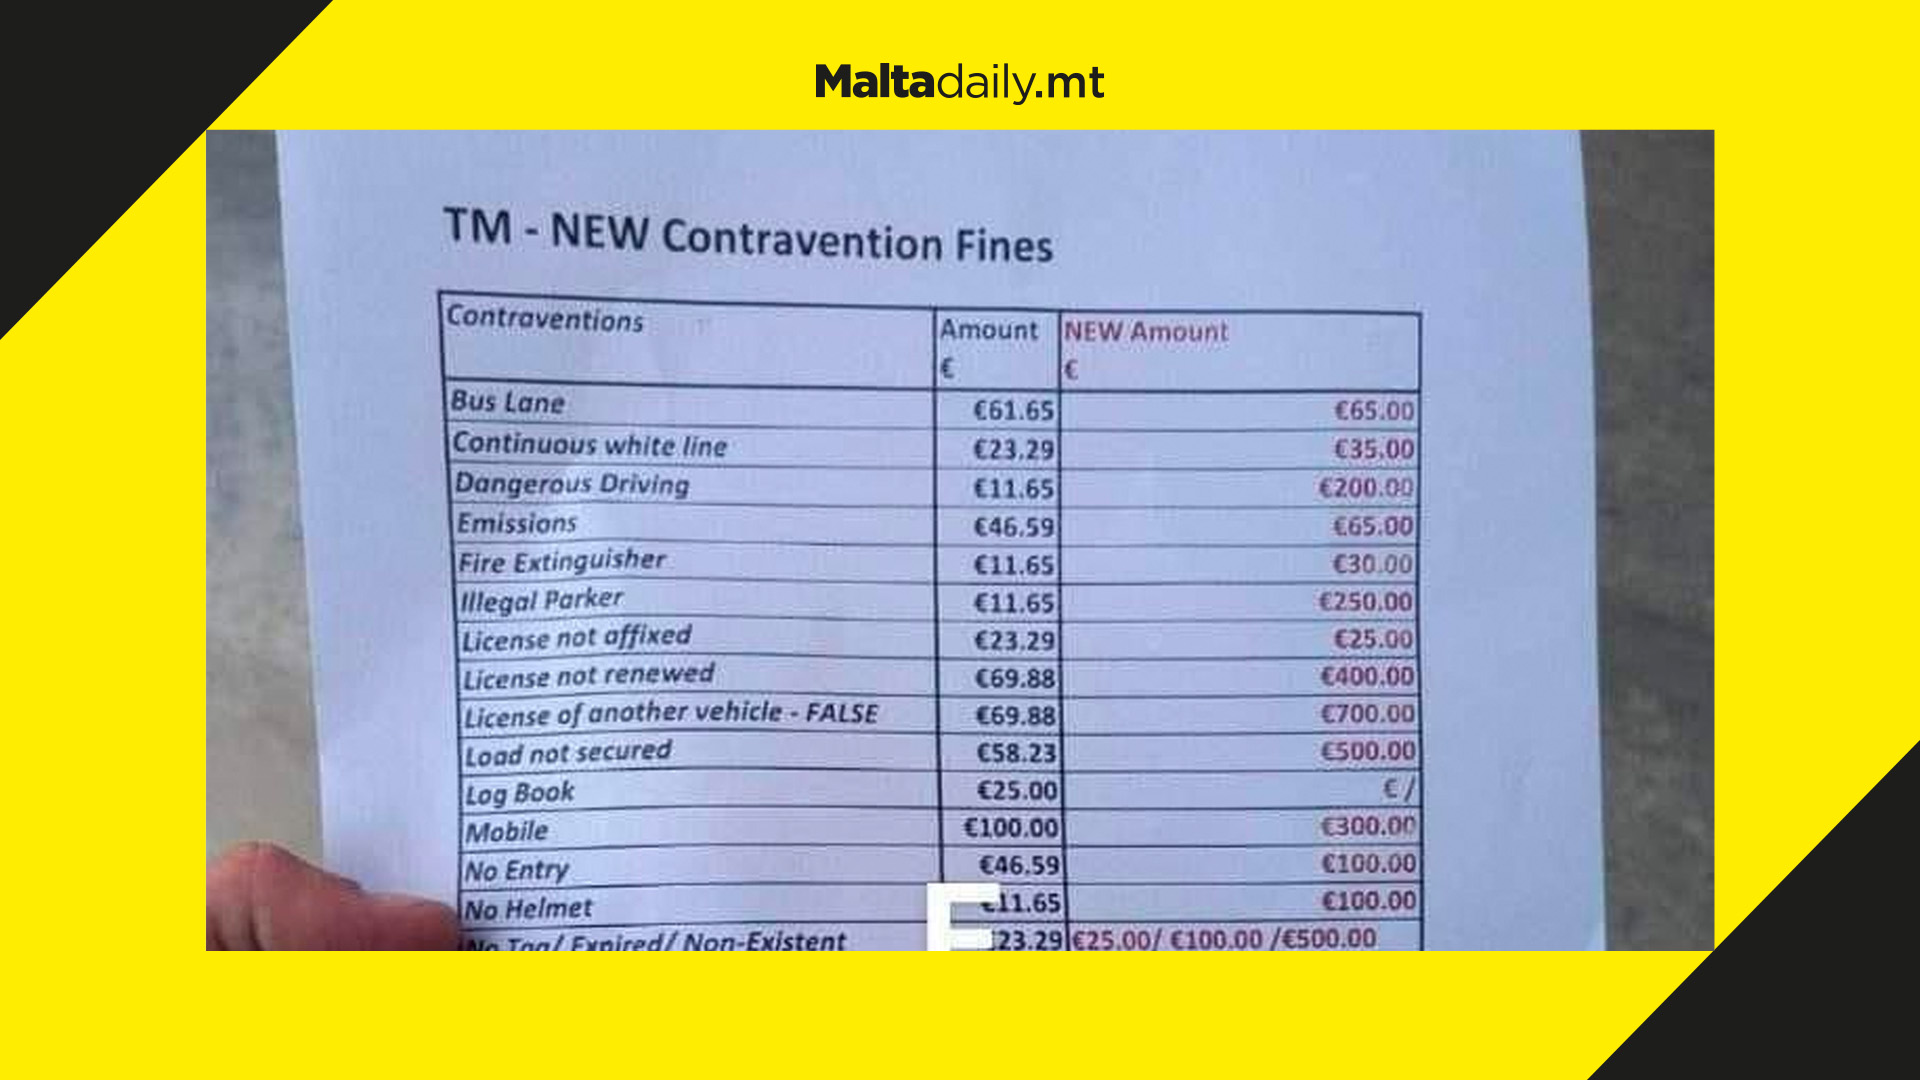 "Nothing decided"; TM addresses circulating sheet of increased contravention fines